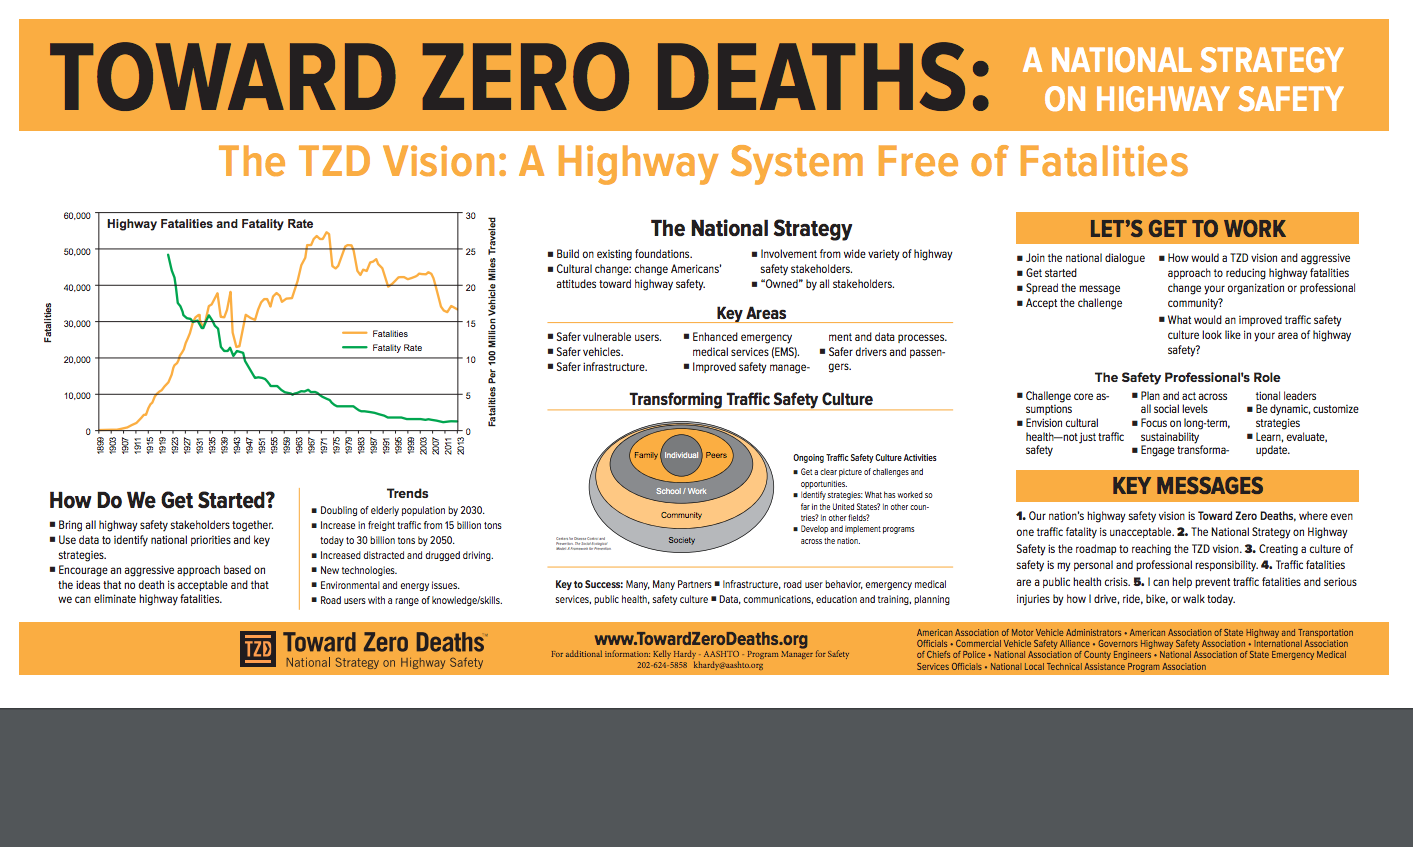 poster-on-tzd-national-strategy-presented-at-the-2015-trb-annual